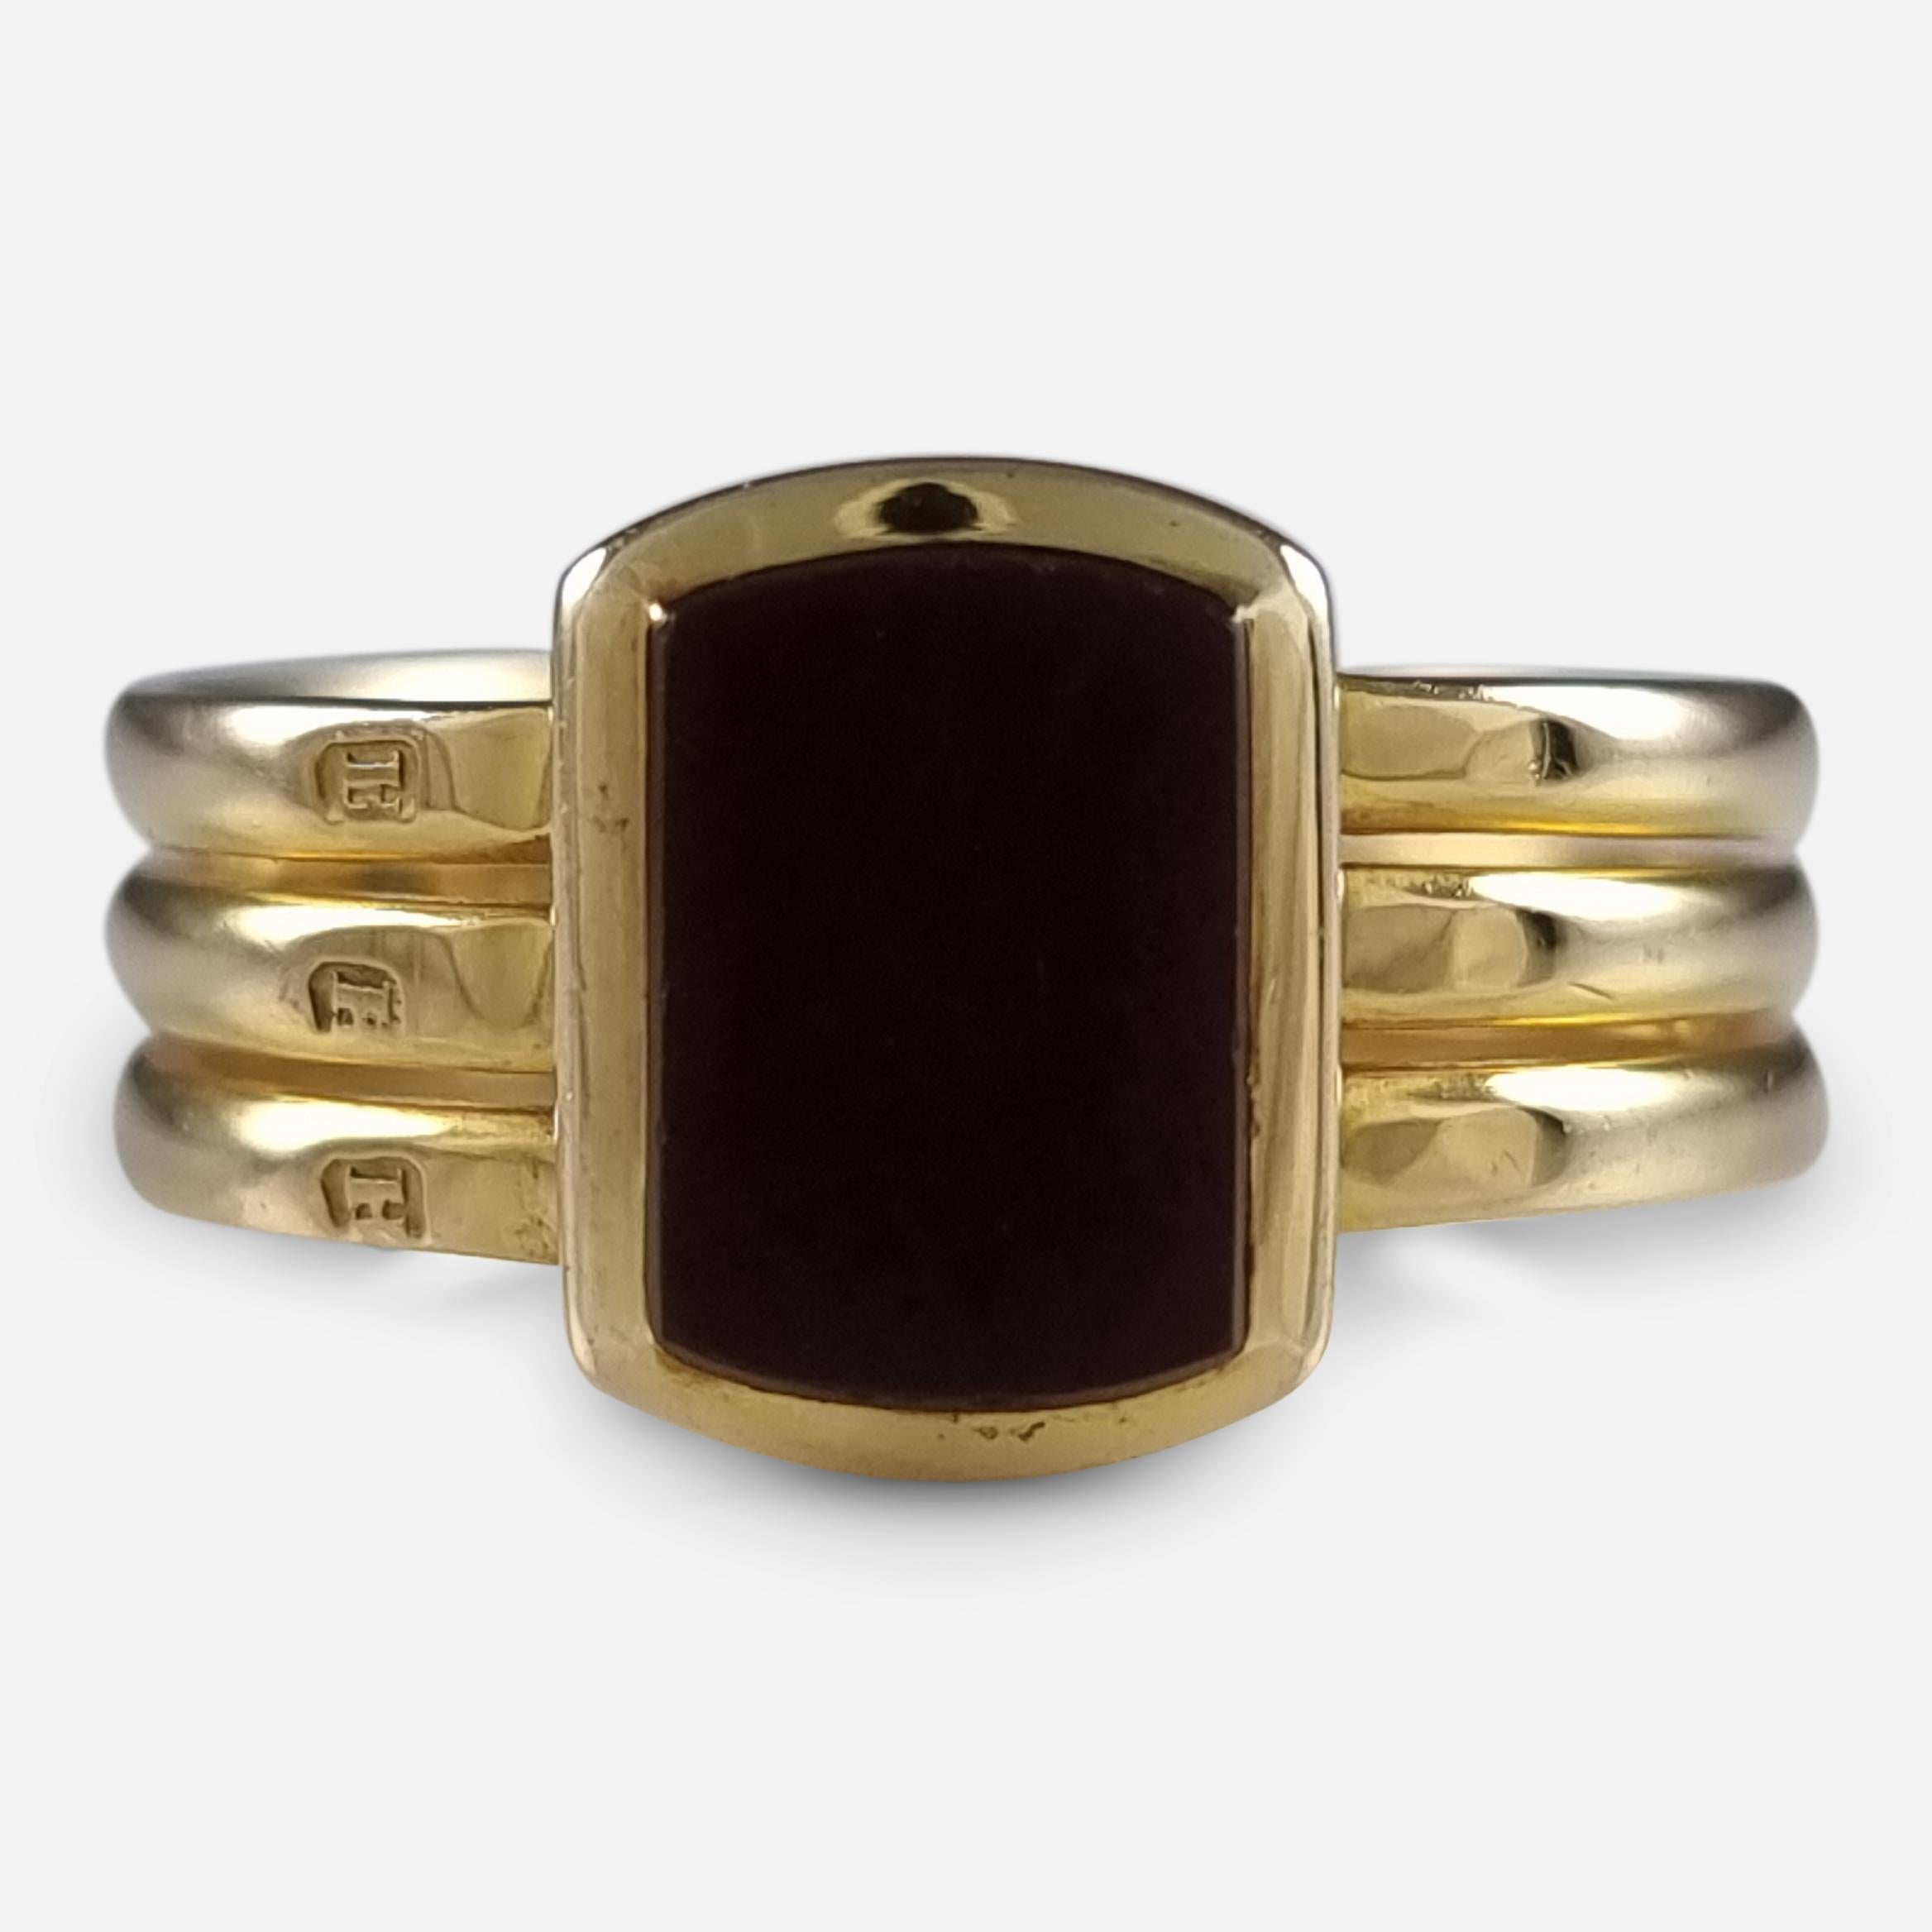 A Victorian 18ct yellow gold rectangular carnelian oval triple shank signet ring.

The ring is hallmarked with London assay office marks, date letter 'H' for 1883, and stamped '18' to denote 18 carat gold.

Period: - Late 19th century.

Date: -